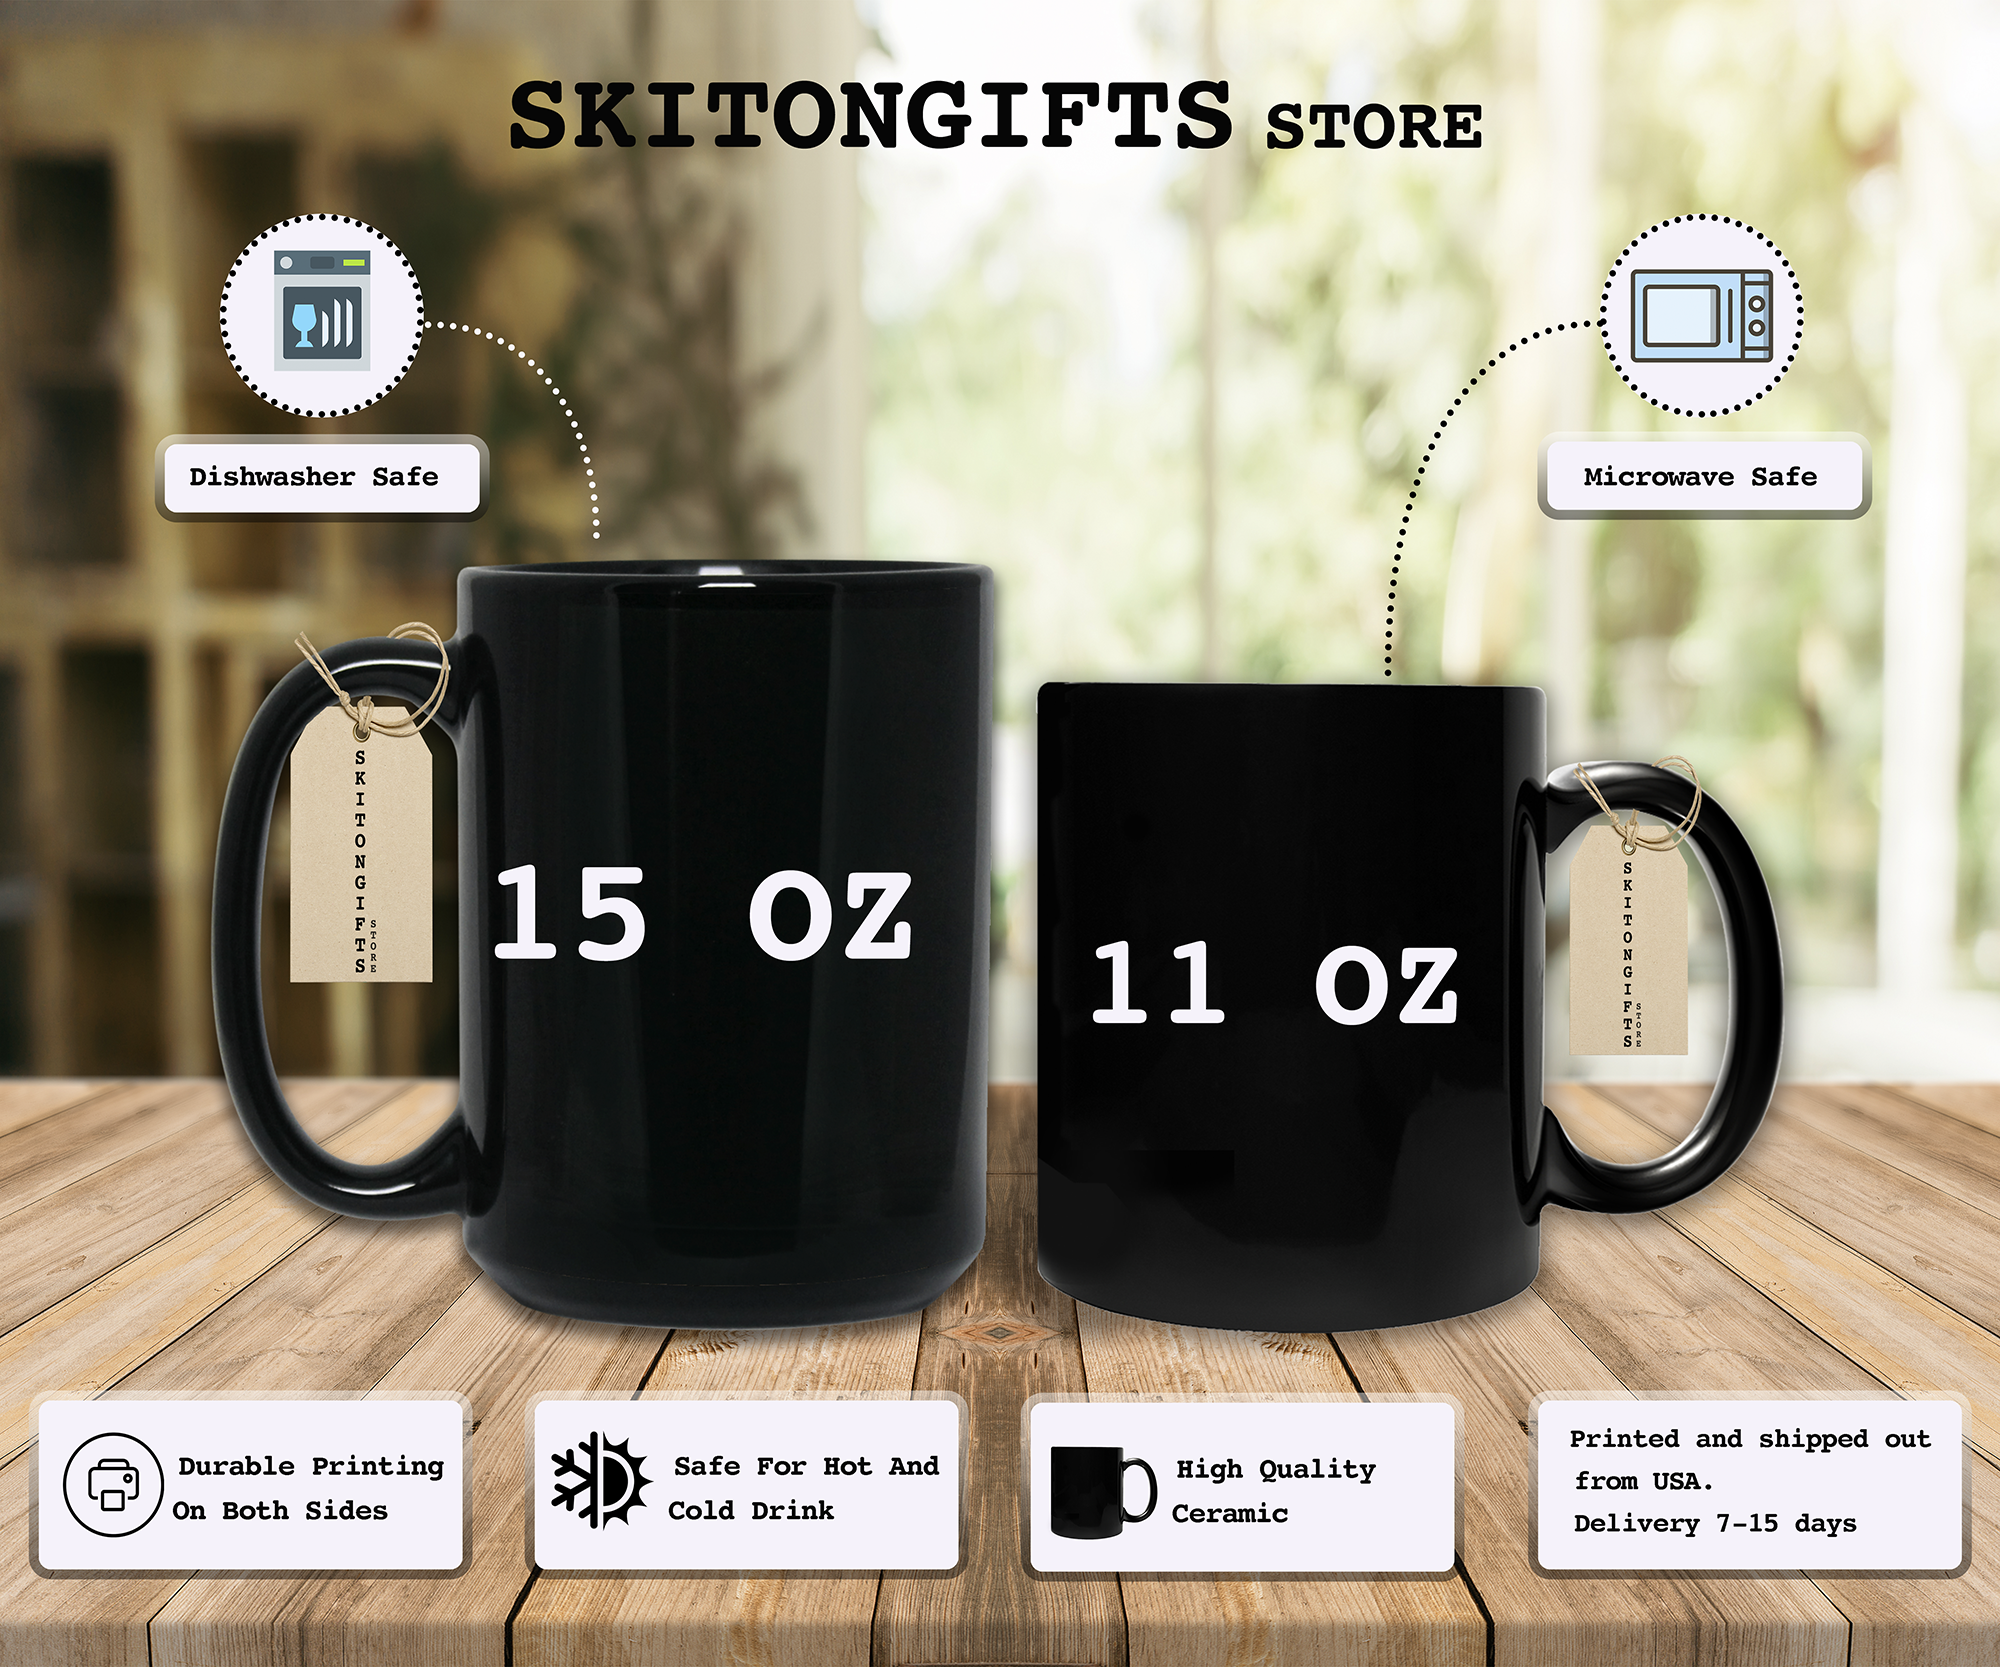 Skitongifts Funny Ceramic Novelty Coffee Mug Yes Im A Court Officer But I Can't Fix Stupid YRiZhSb